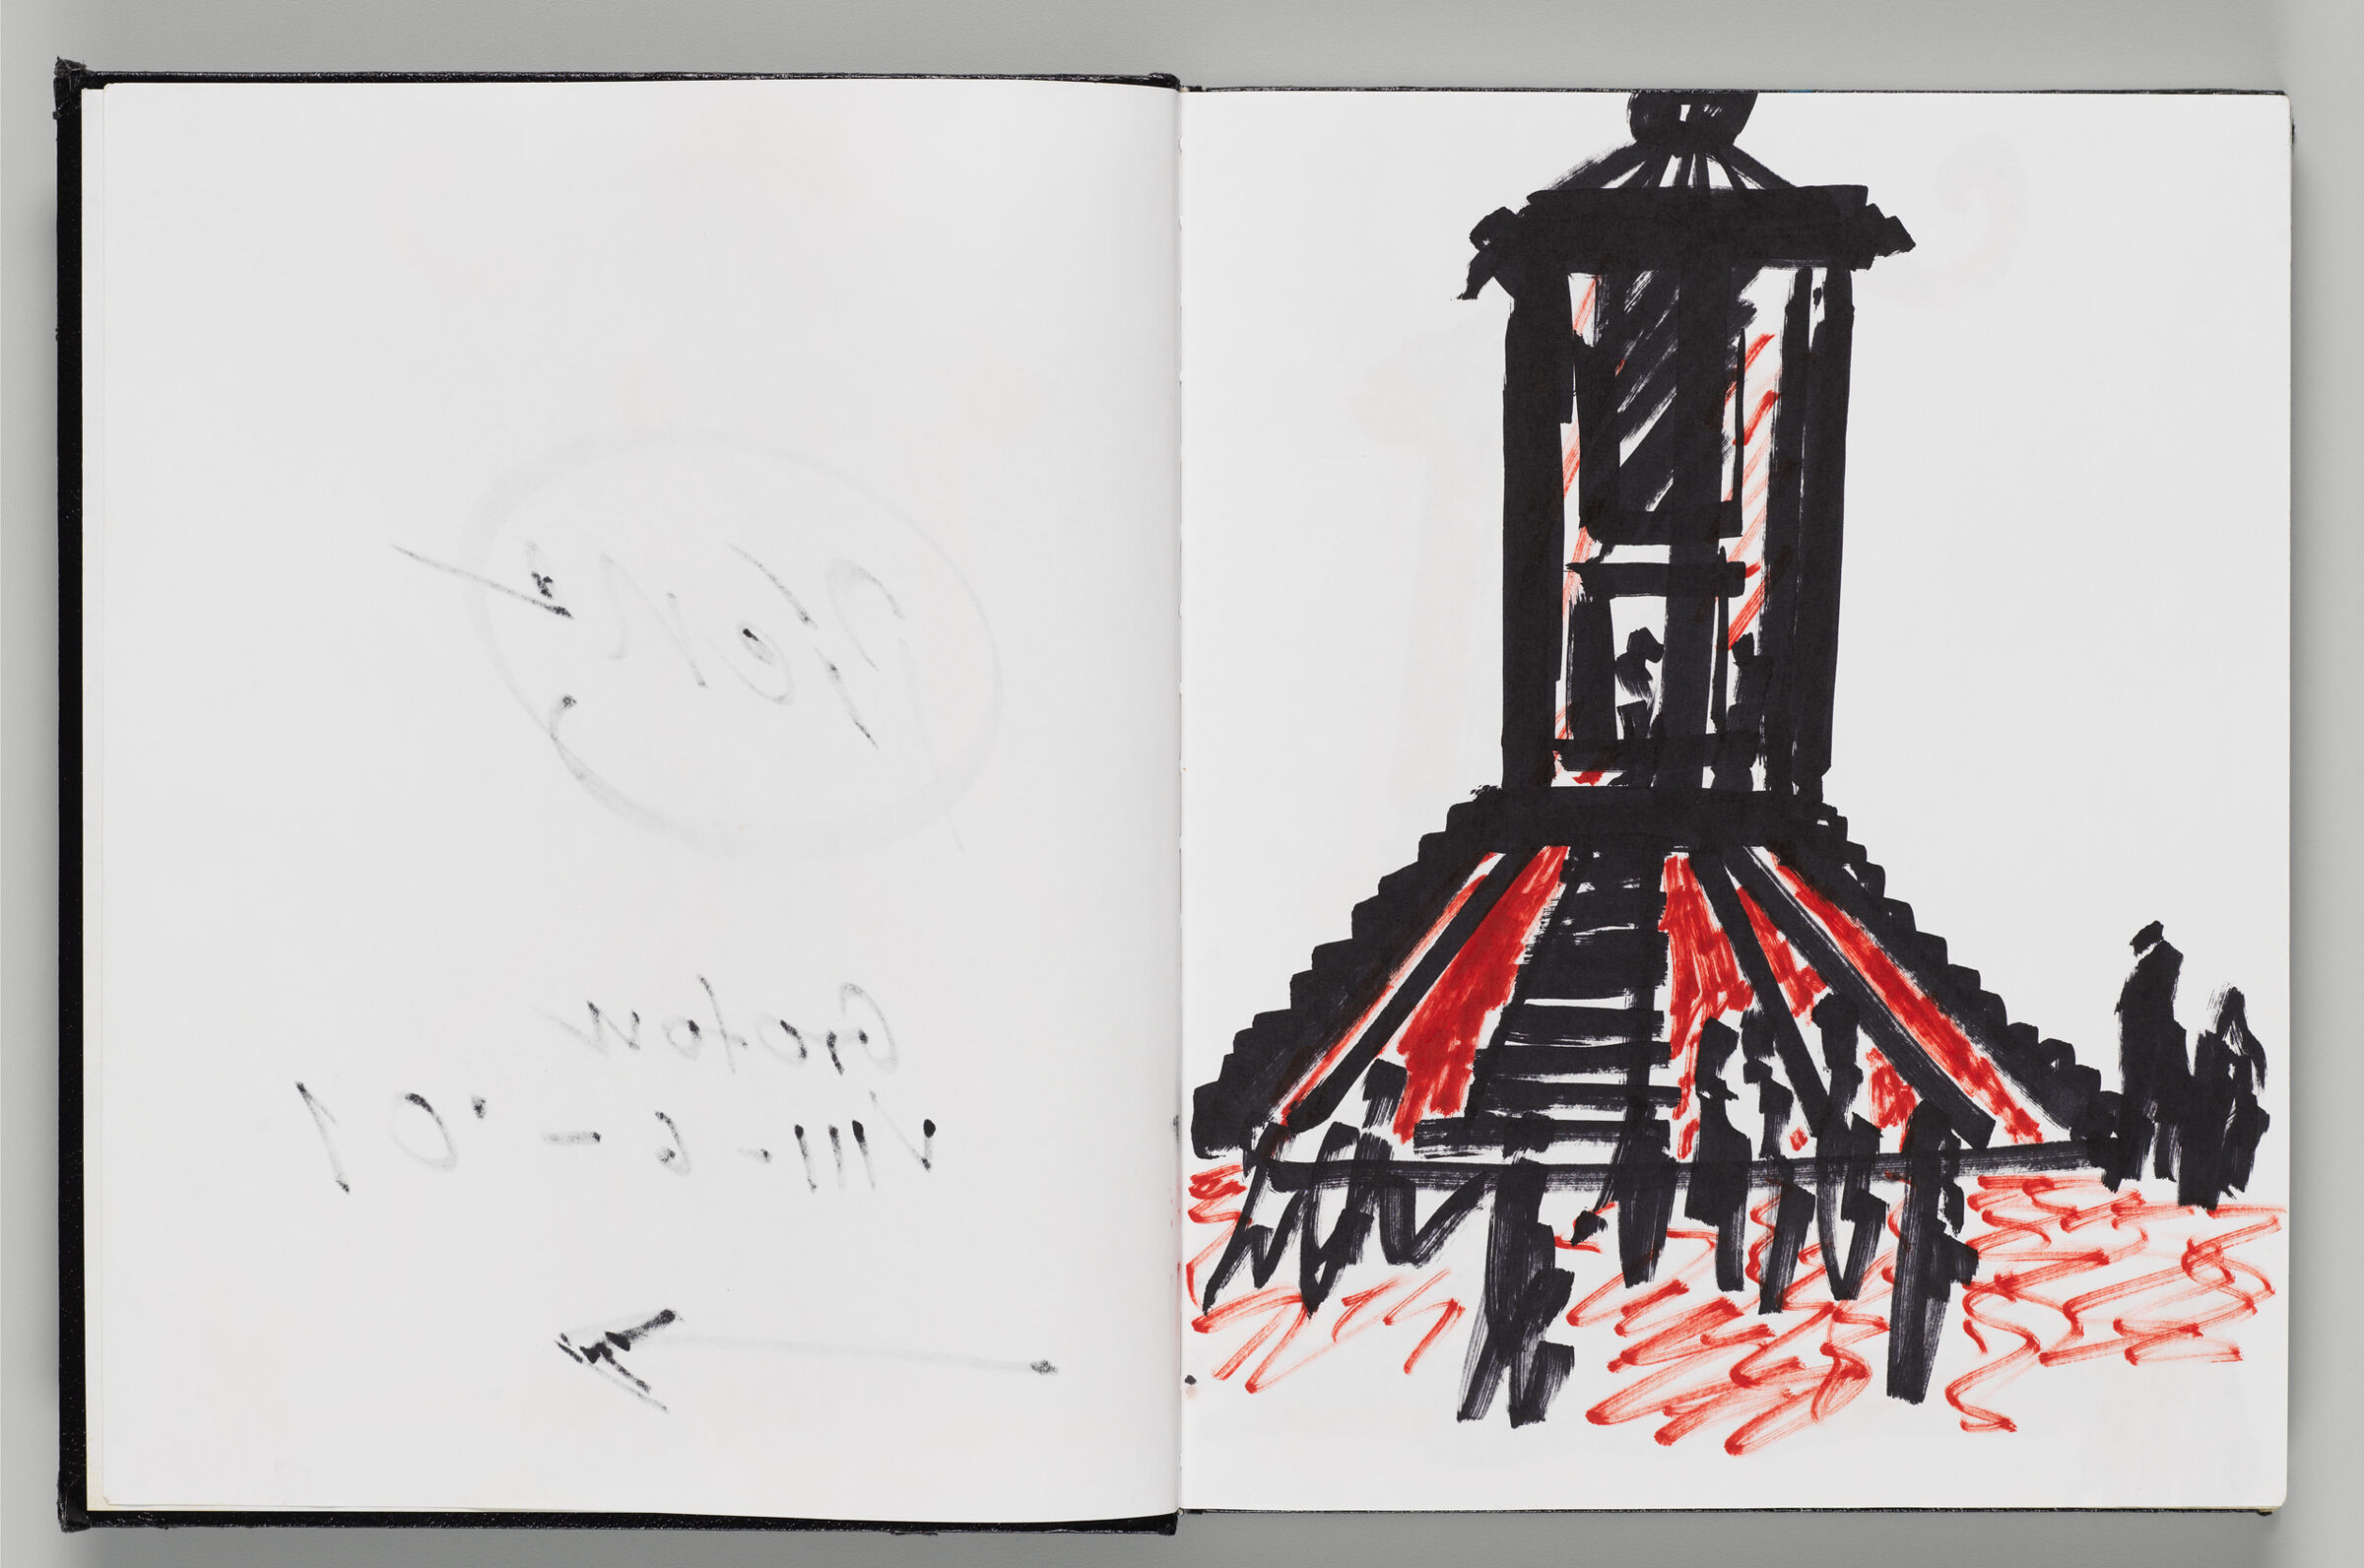 Untitled (Bleed-Through Of Previous Page, Left Page); Untitled (Design For Mining Lamp Sculpture, Right Page)